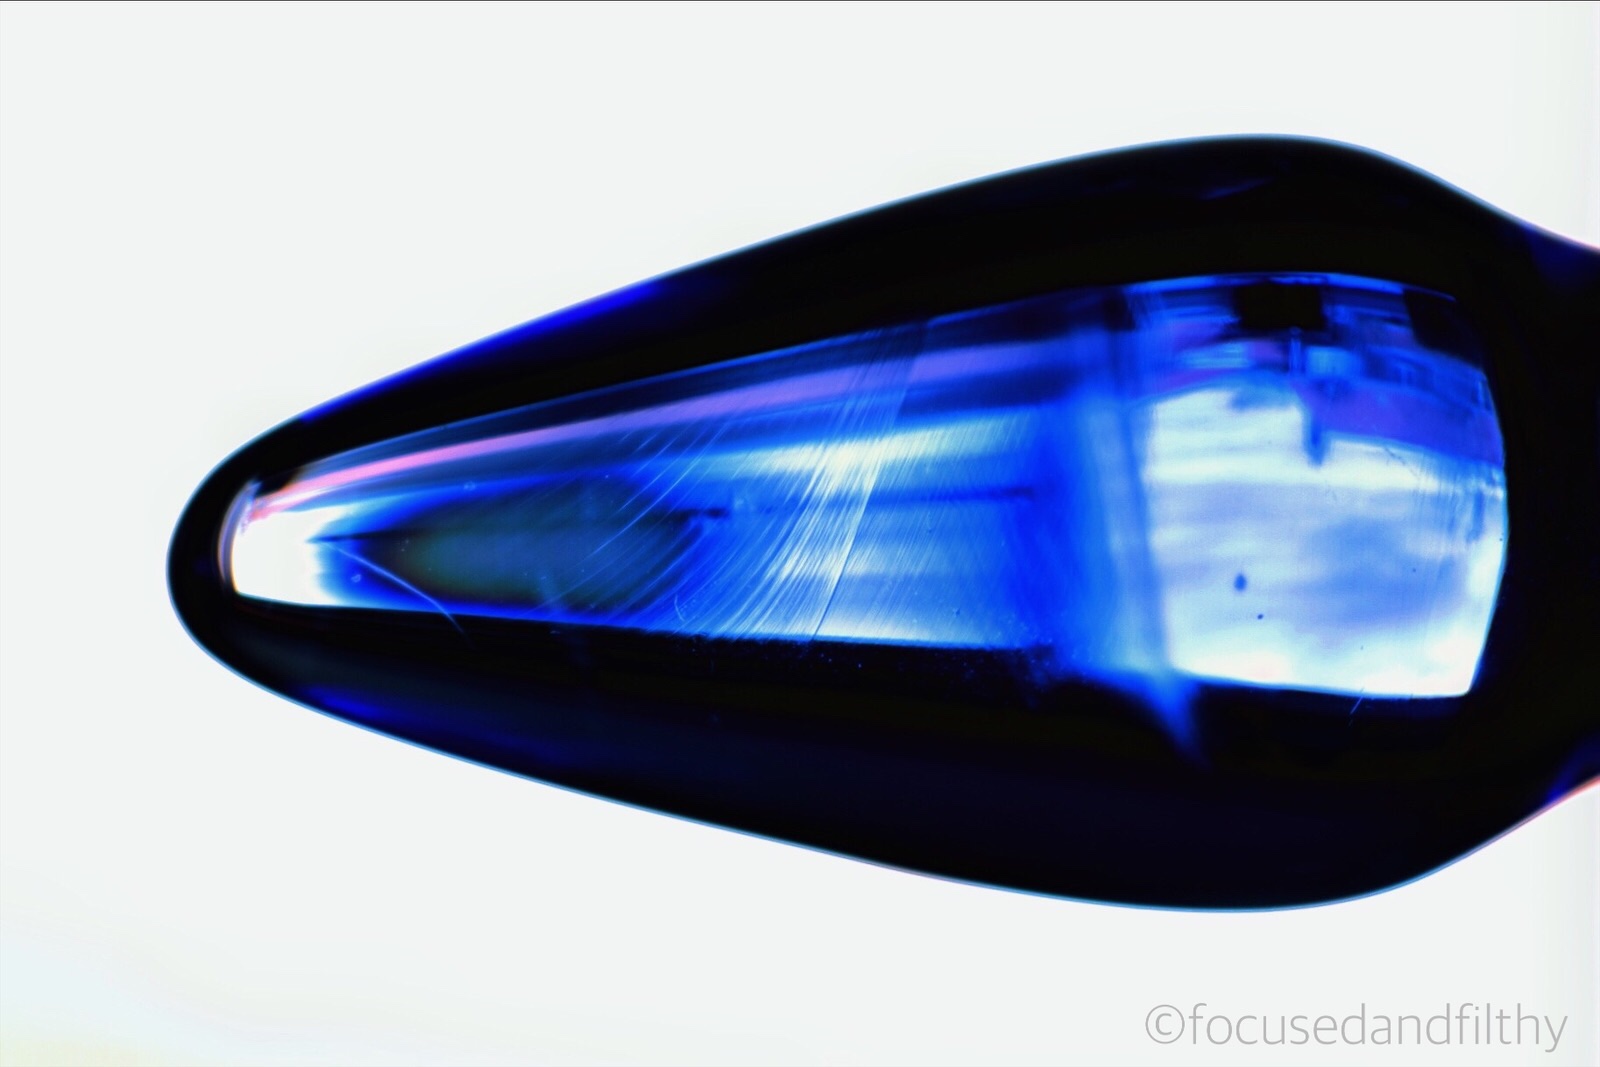 Close up colour photograph of just the tip of a blue glass butt plug which is slightly see through and like a torpedo tip